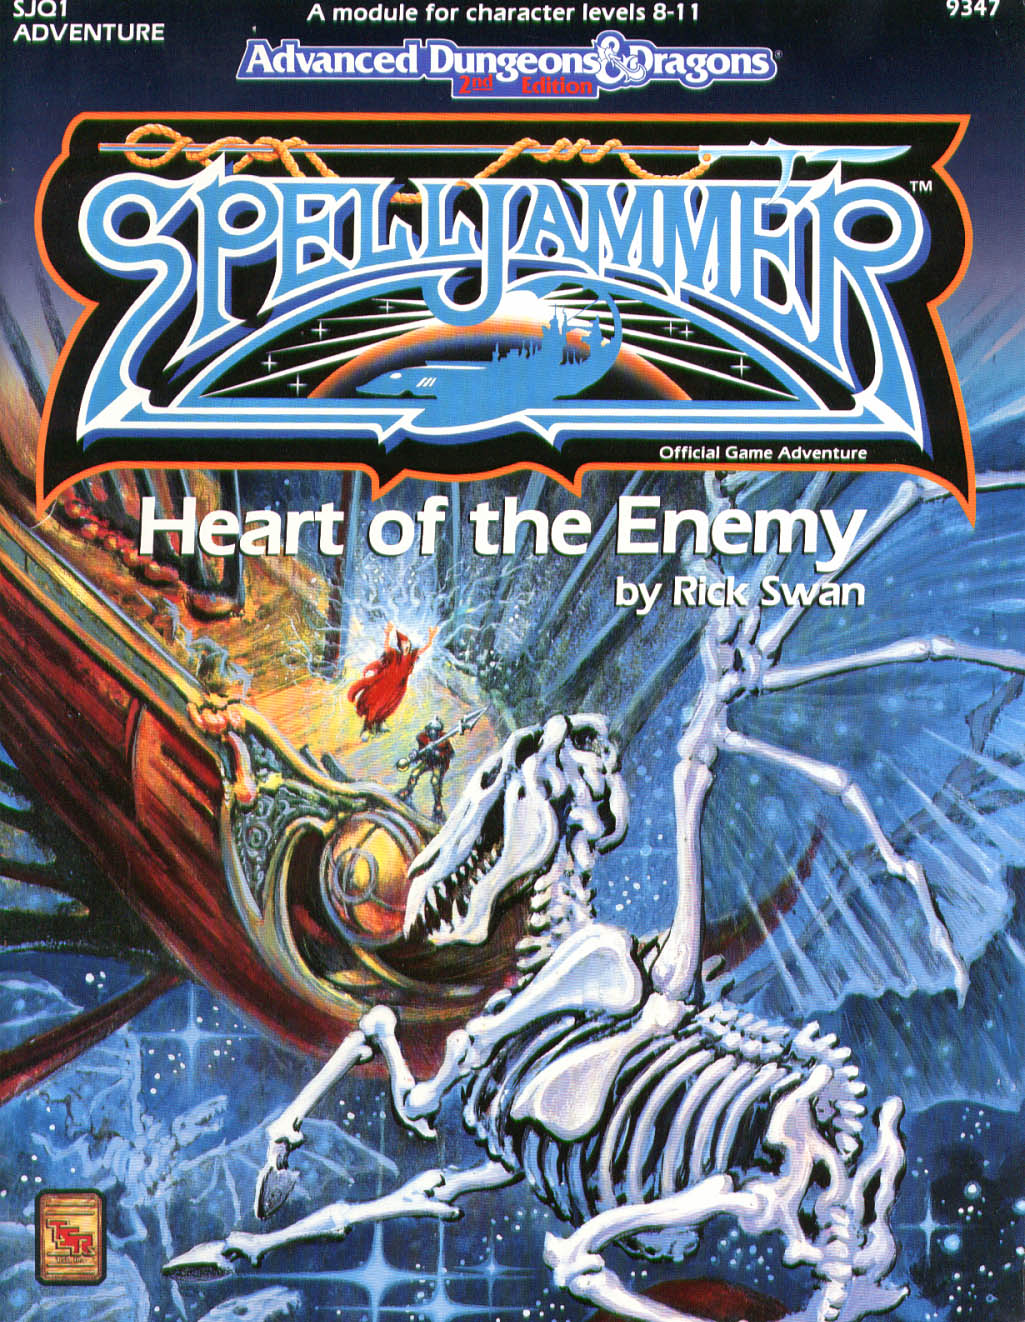 SJQ1 Heart of the EnemyCover art